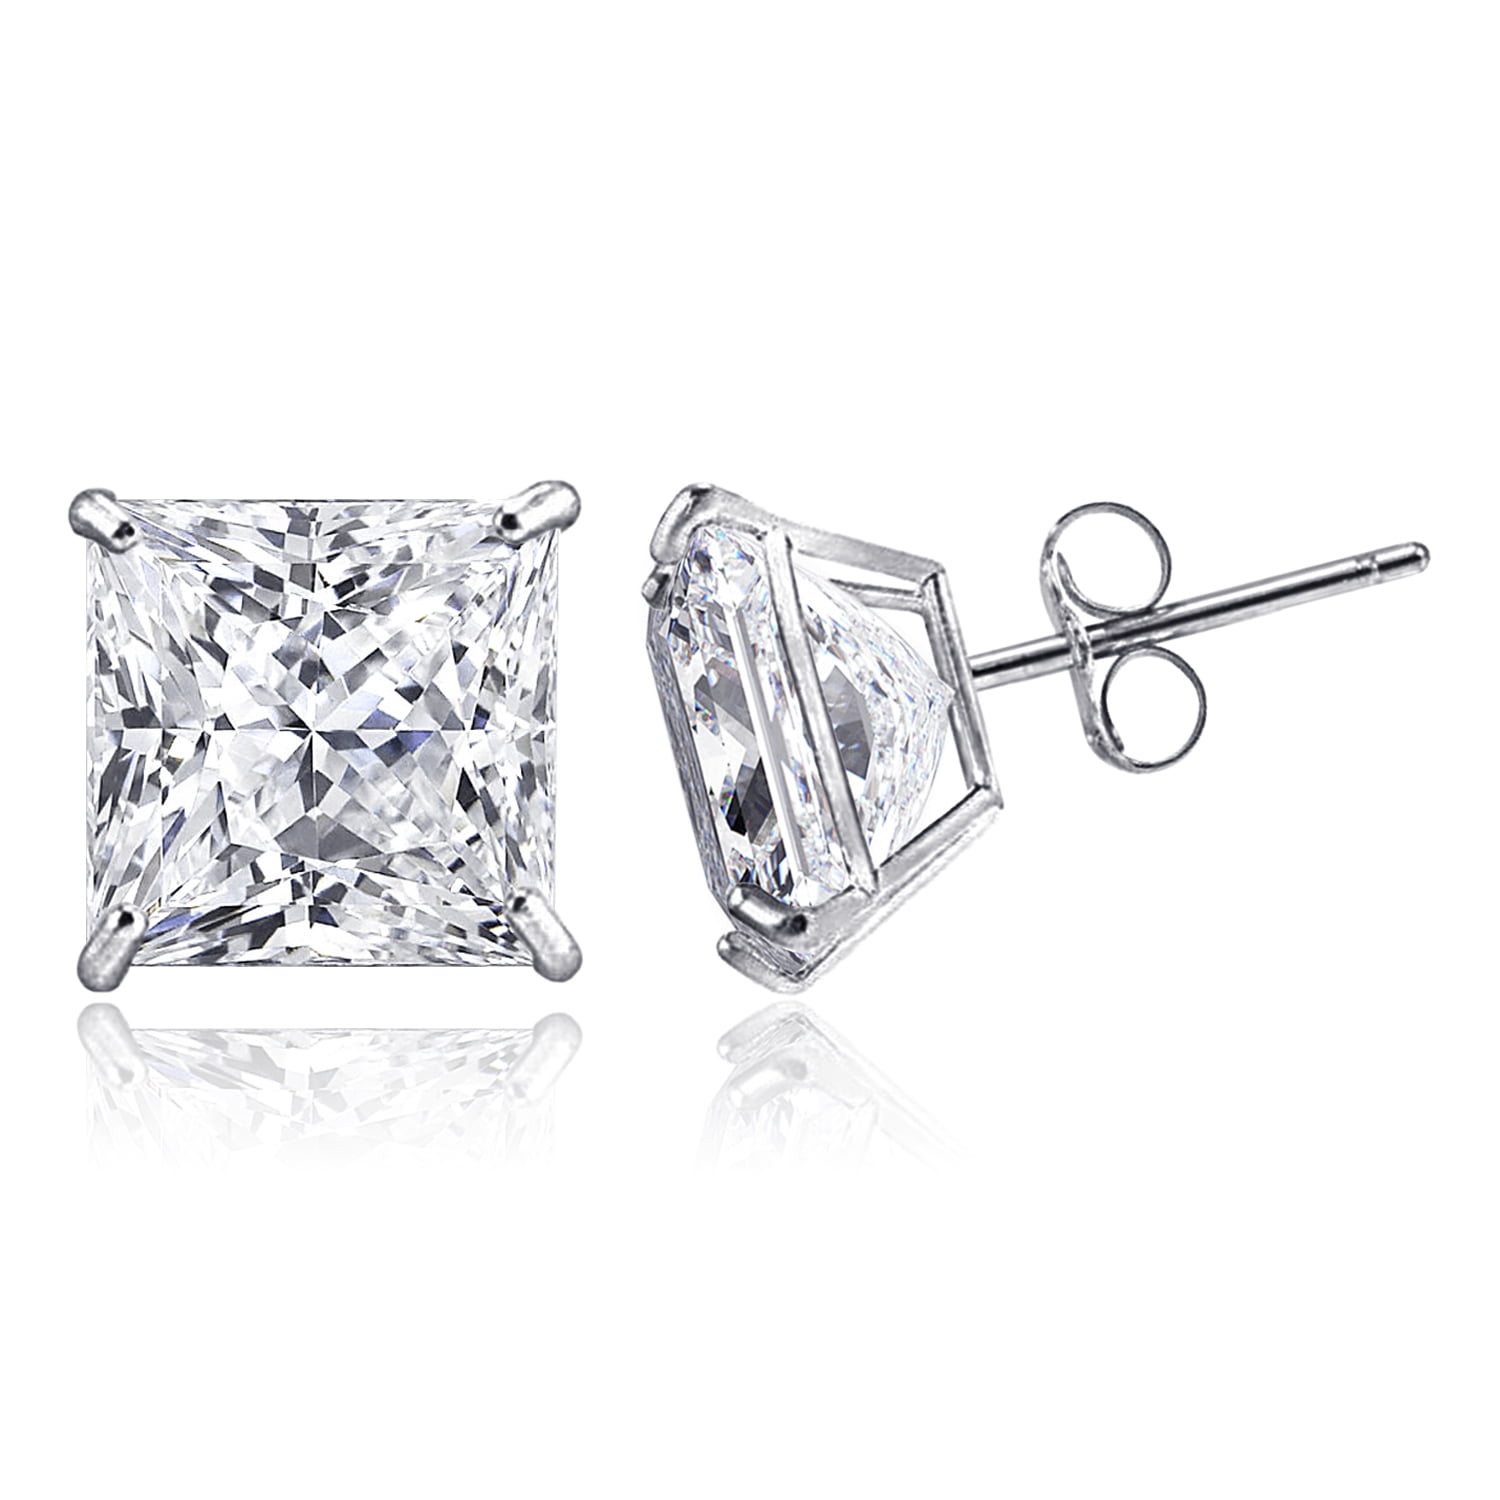 14K Solid White Gold Princess Square CZ Stud Earrings Basket Setting sizes2-10mm 